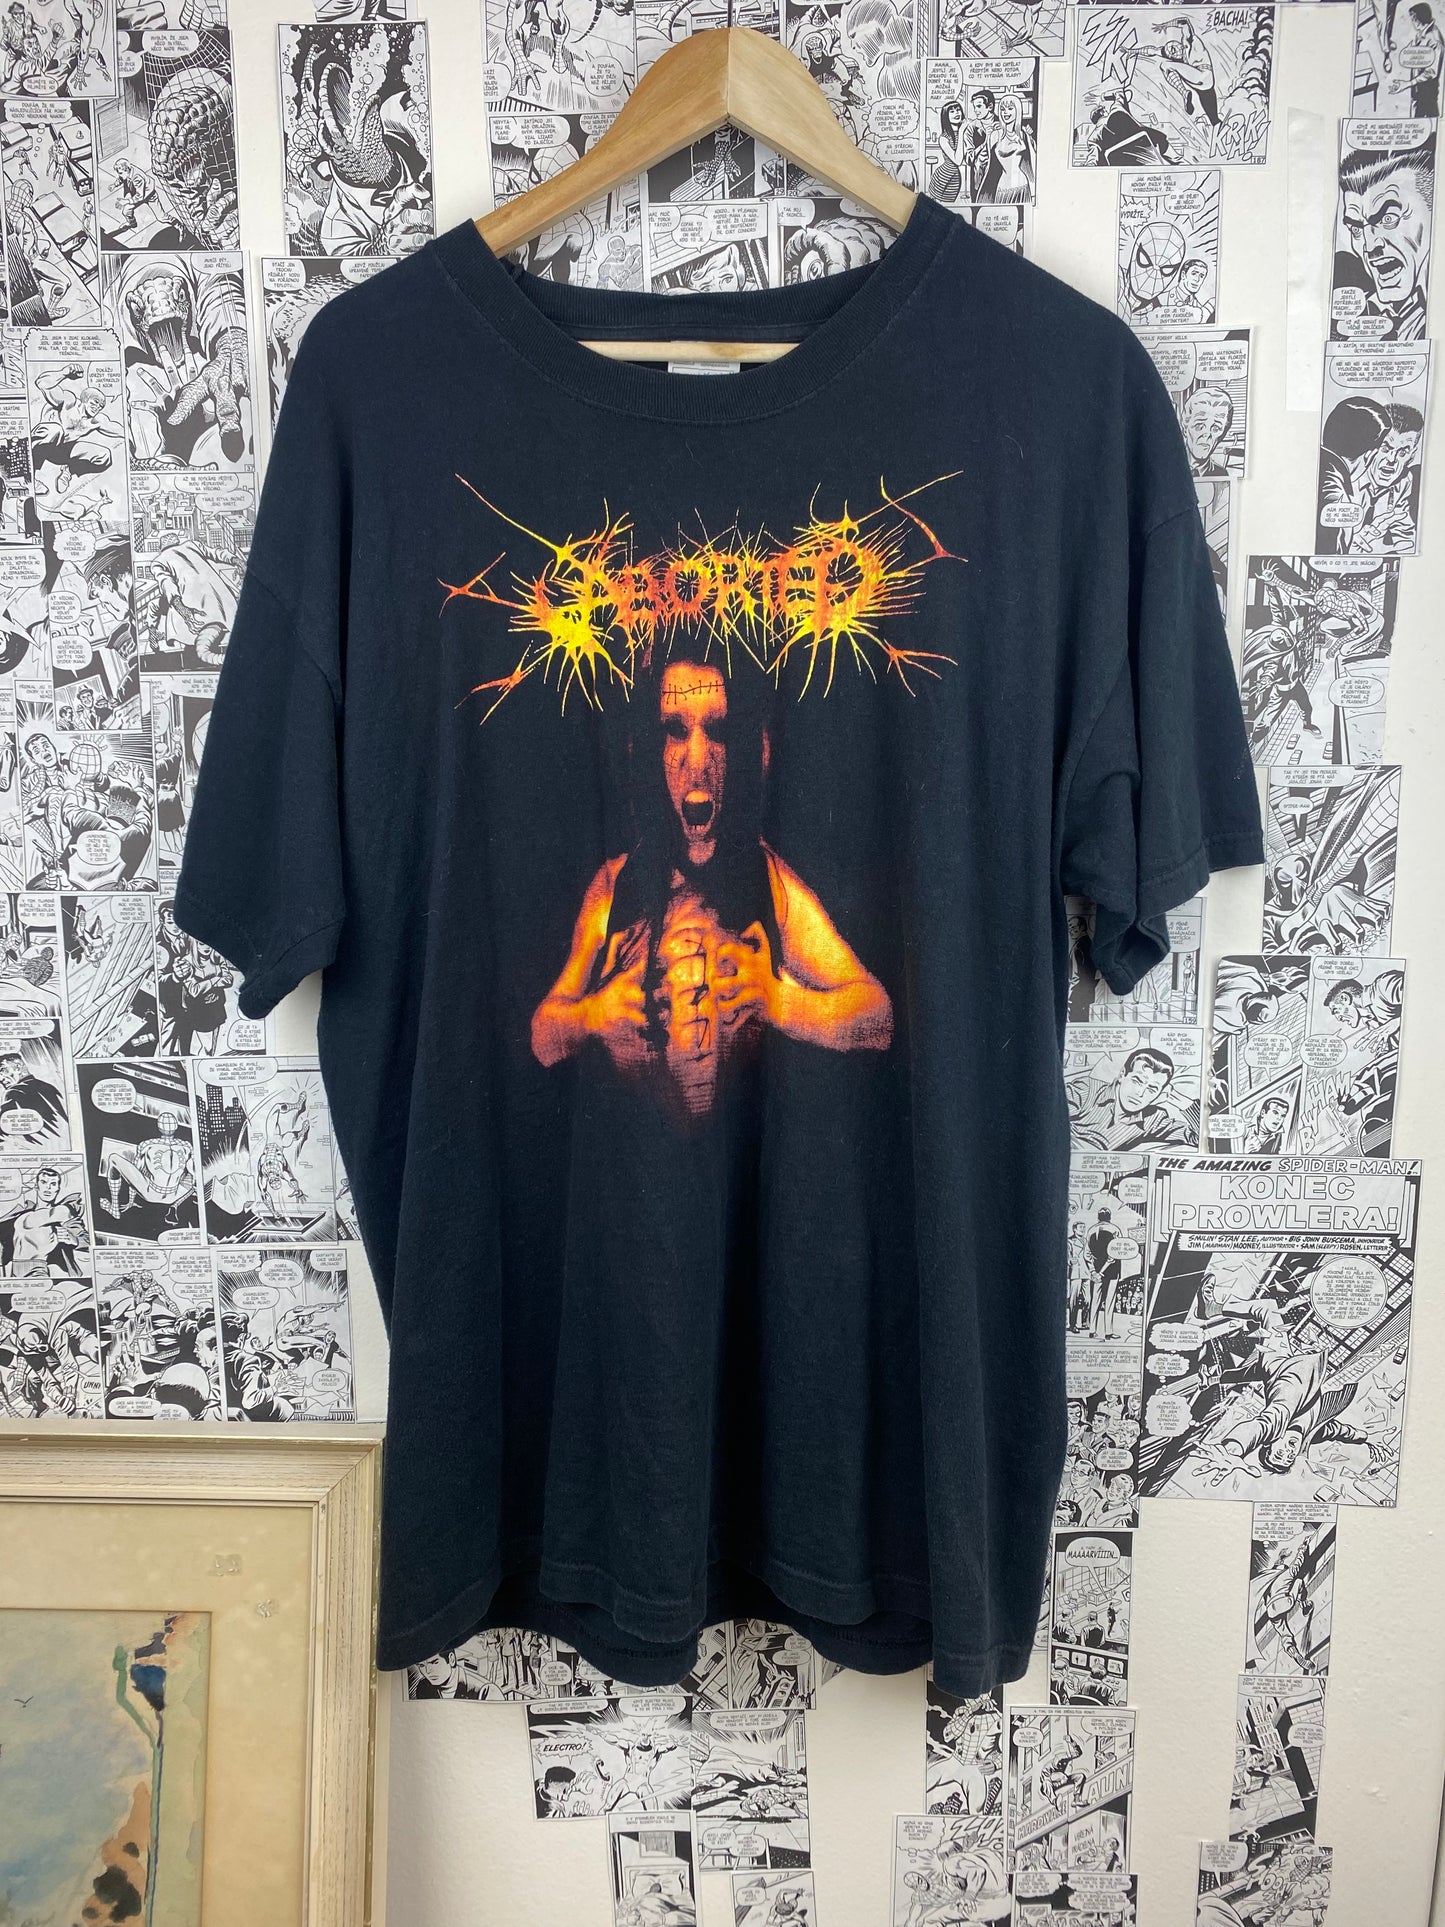 Vintage Aborted “Mankind Created to Kill” 2002 t-shirt - size XL